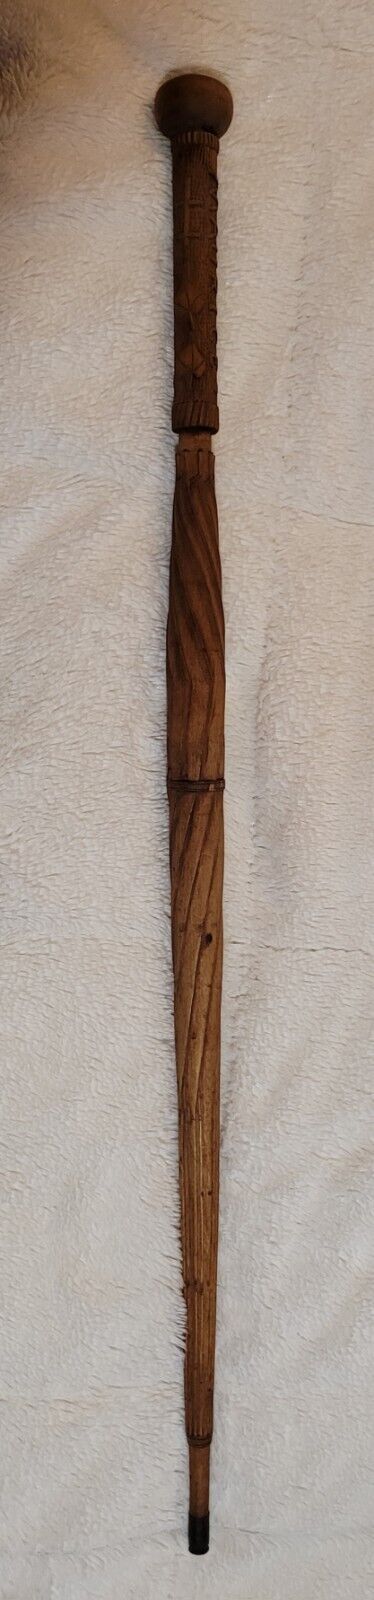 SALE 32% OFF RARE Antique Carved Wooden Umbrella Walking Cane-Fraternity?Ladies?